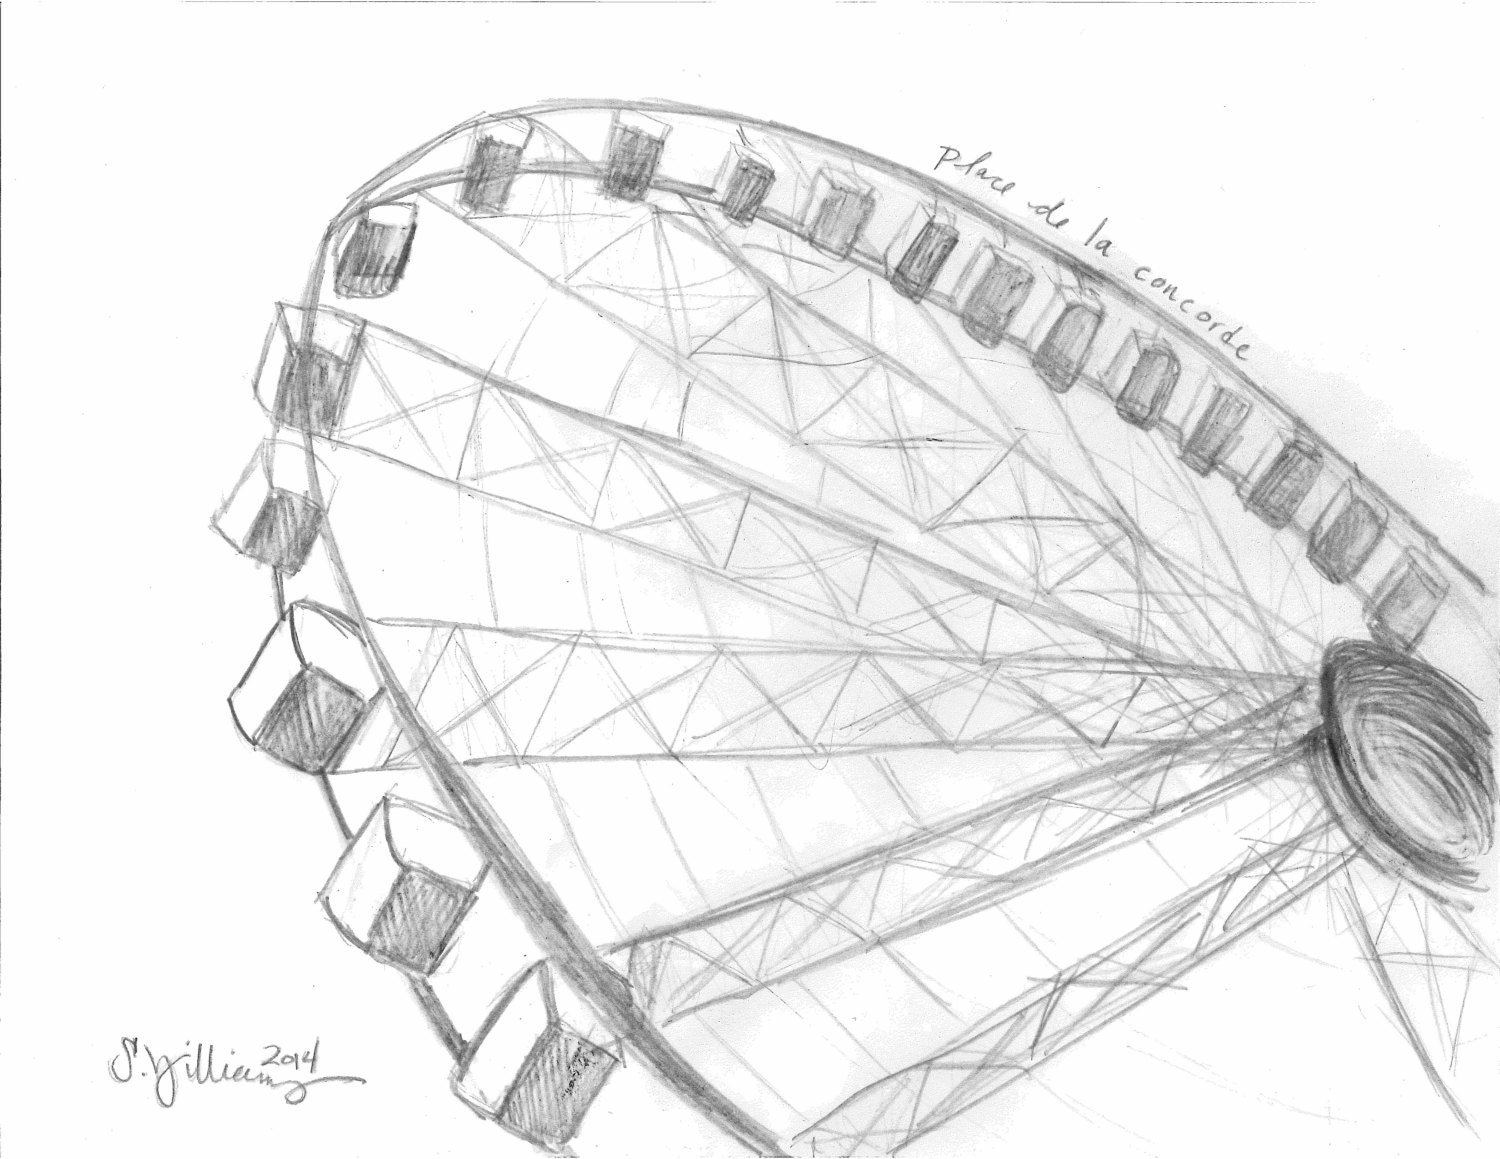 Ferris Wheel White Transparent, City Line Drawing Ferris Wheel, City Drawing,  Wing Drawing, Ferris Wheel Drawing PNG Image For Free Download